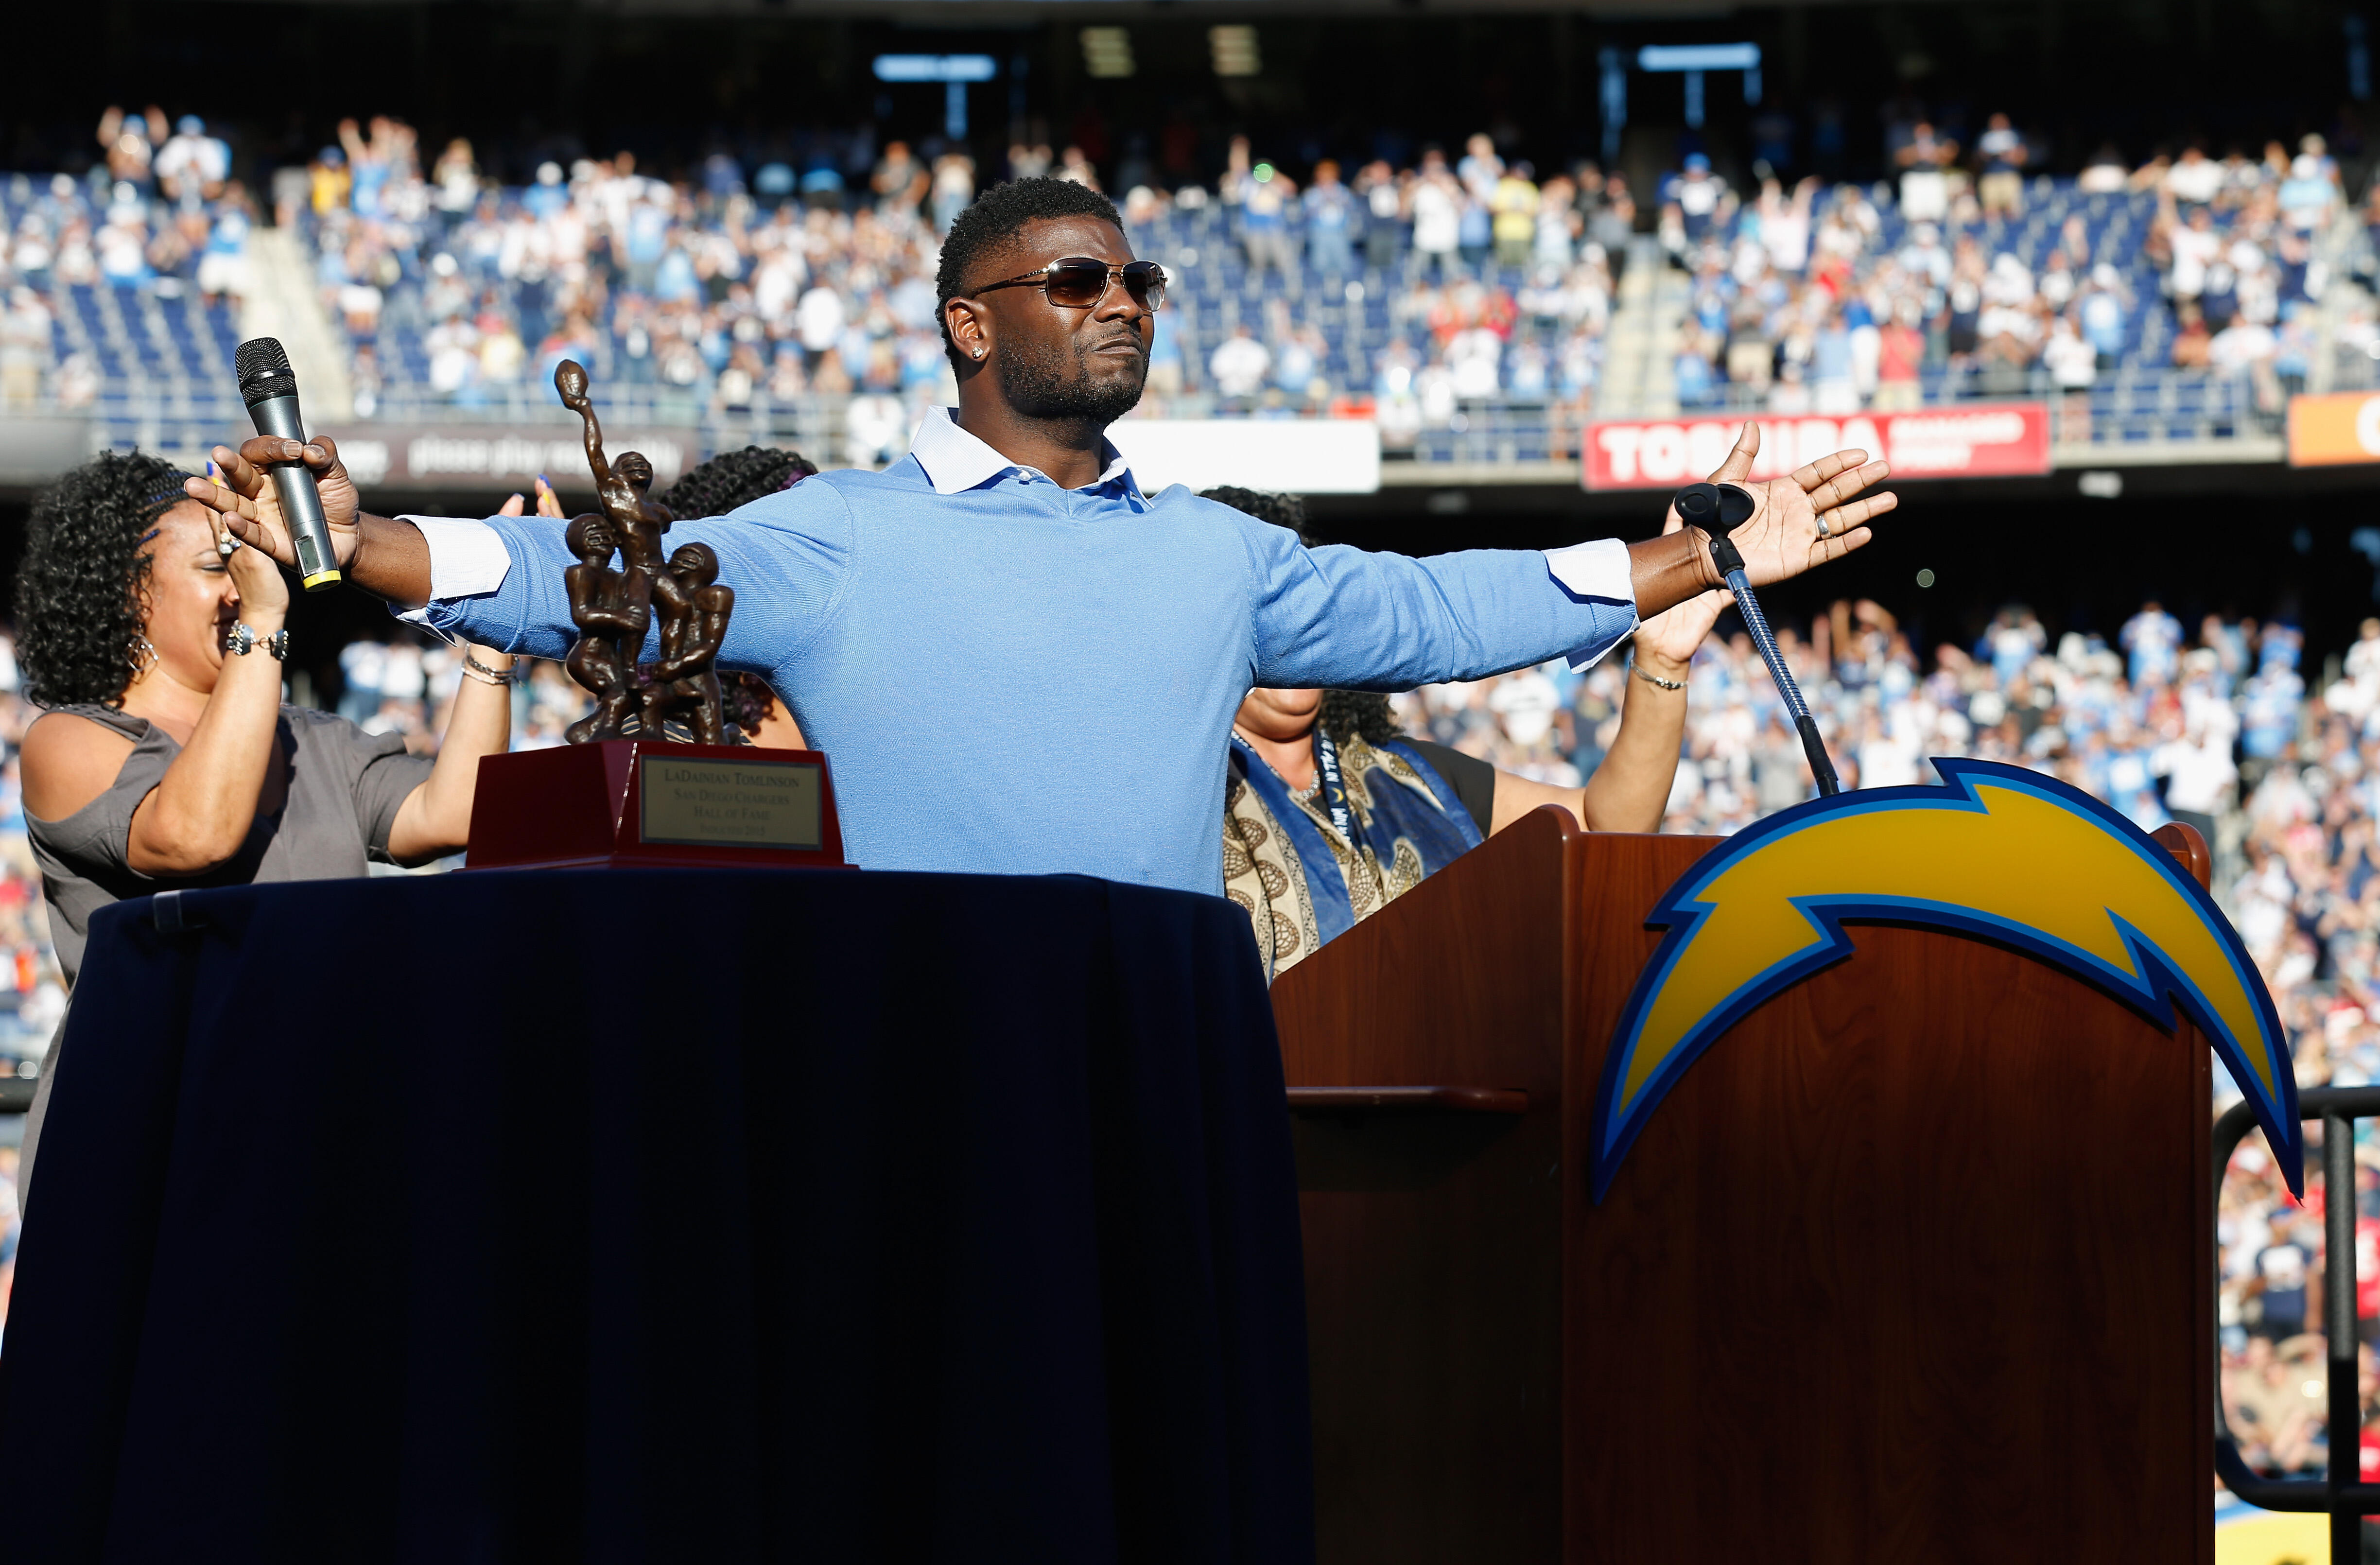 SAN DIEGO, CA - NOVEMBER 22: Former NFL Player LaDanian Tomlinson had his number retired by the San Diego Chargers during halftime of a game against the Kansas City Chiefs at Qualcomm Stadium on November 22, 2015 in San Diego, California. (Photo by Sean M